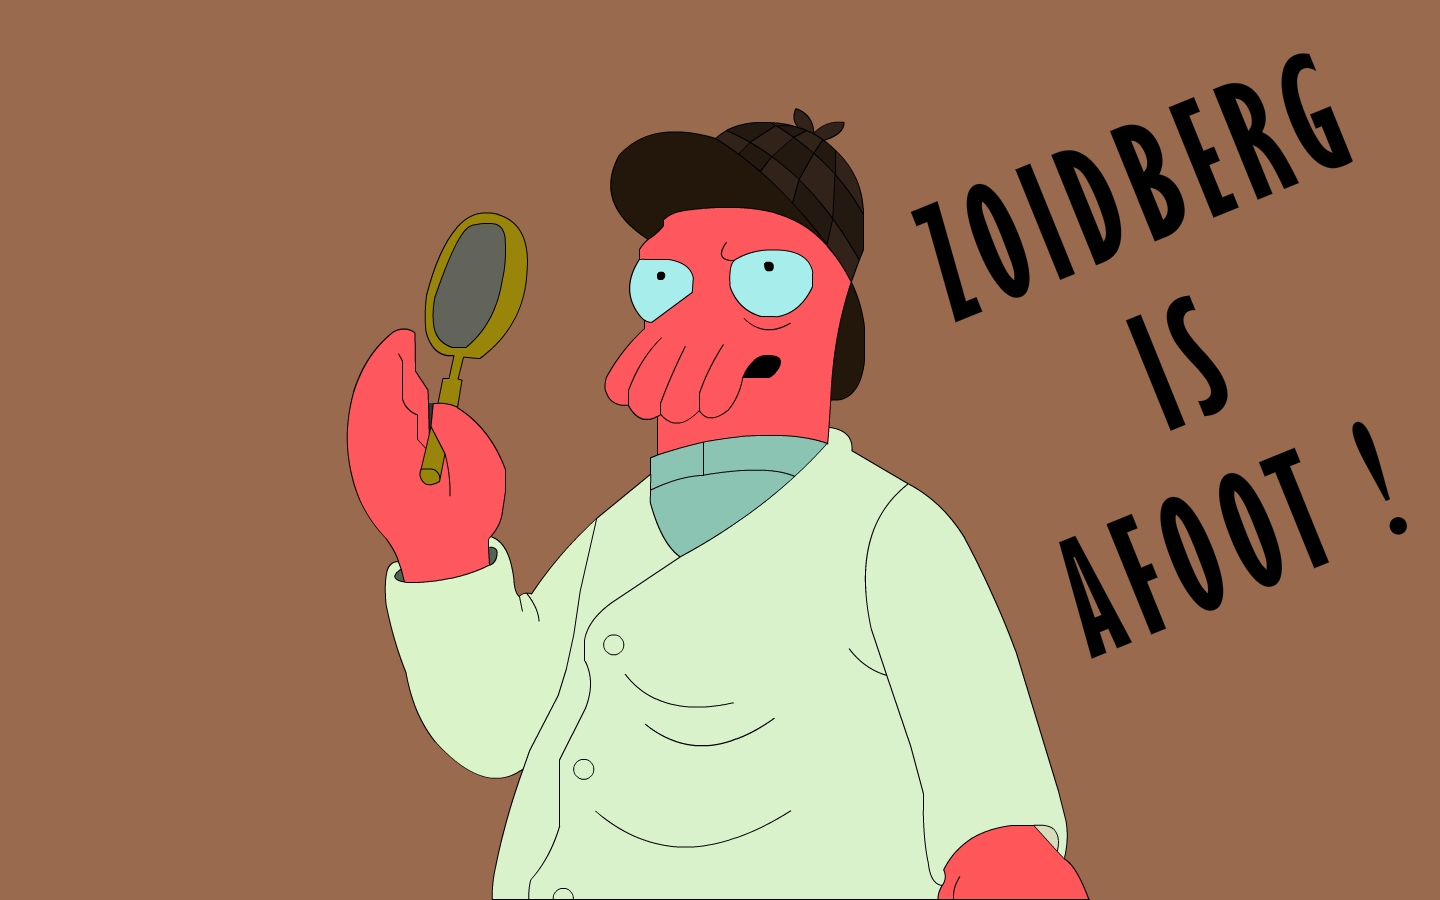 Dr zoidberg tribute page